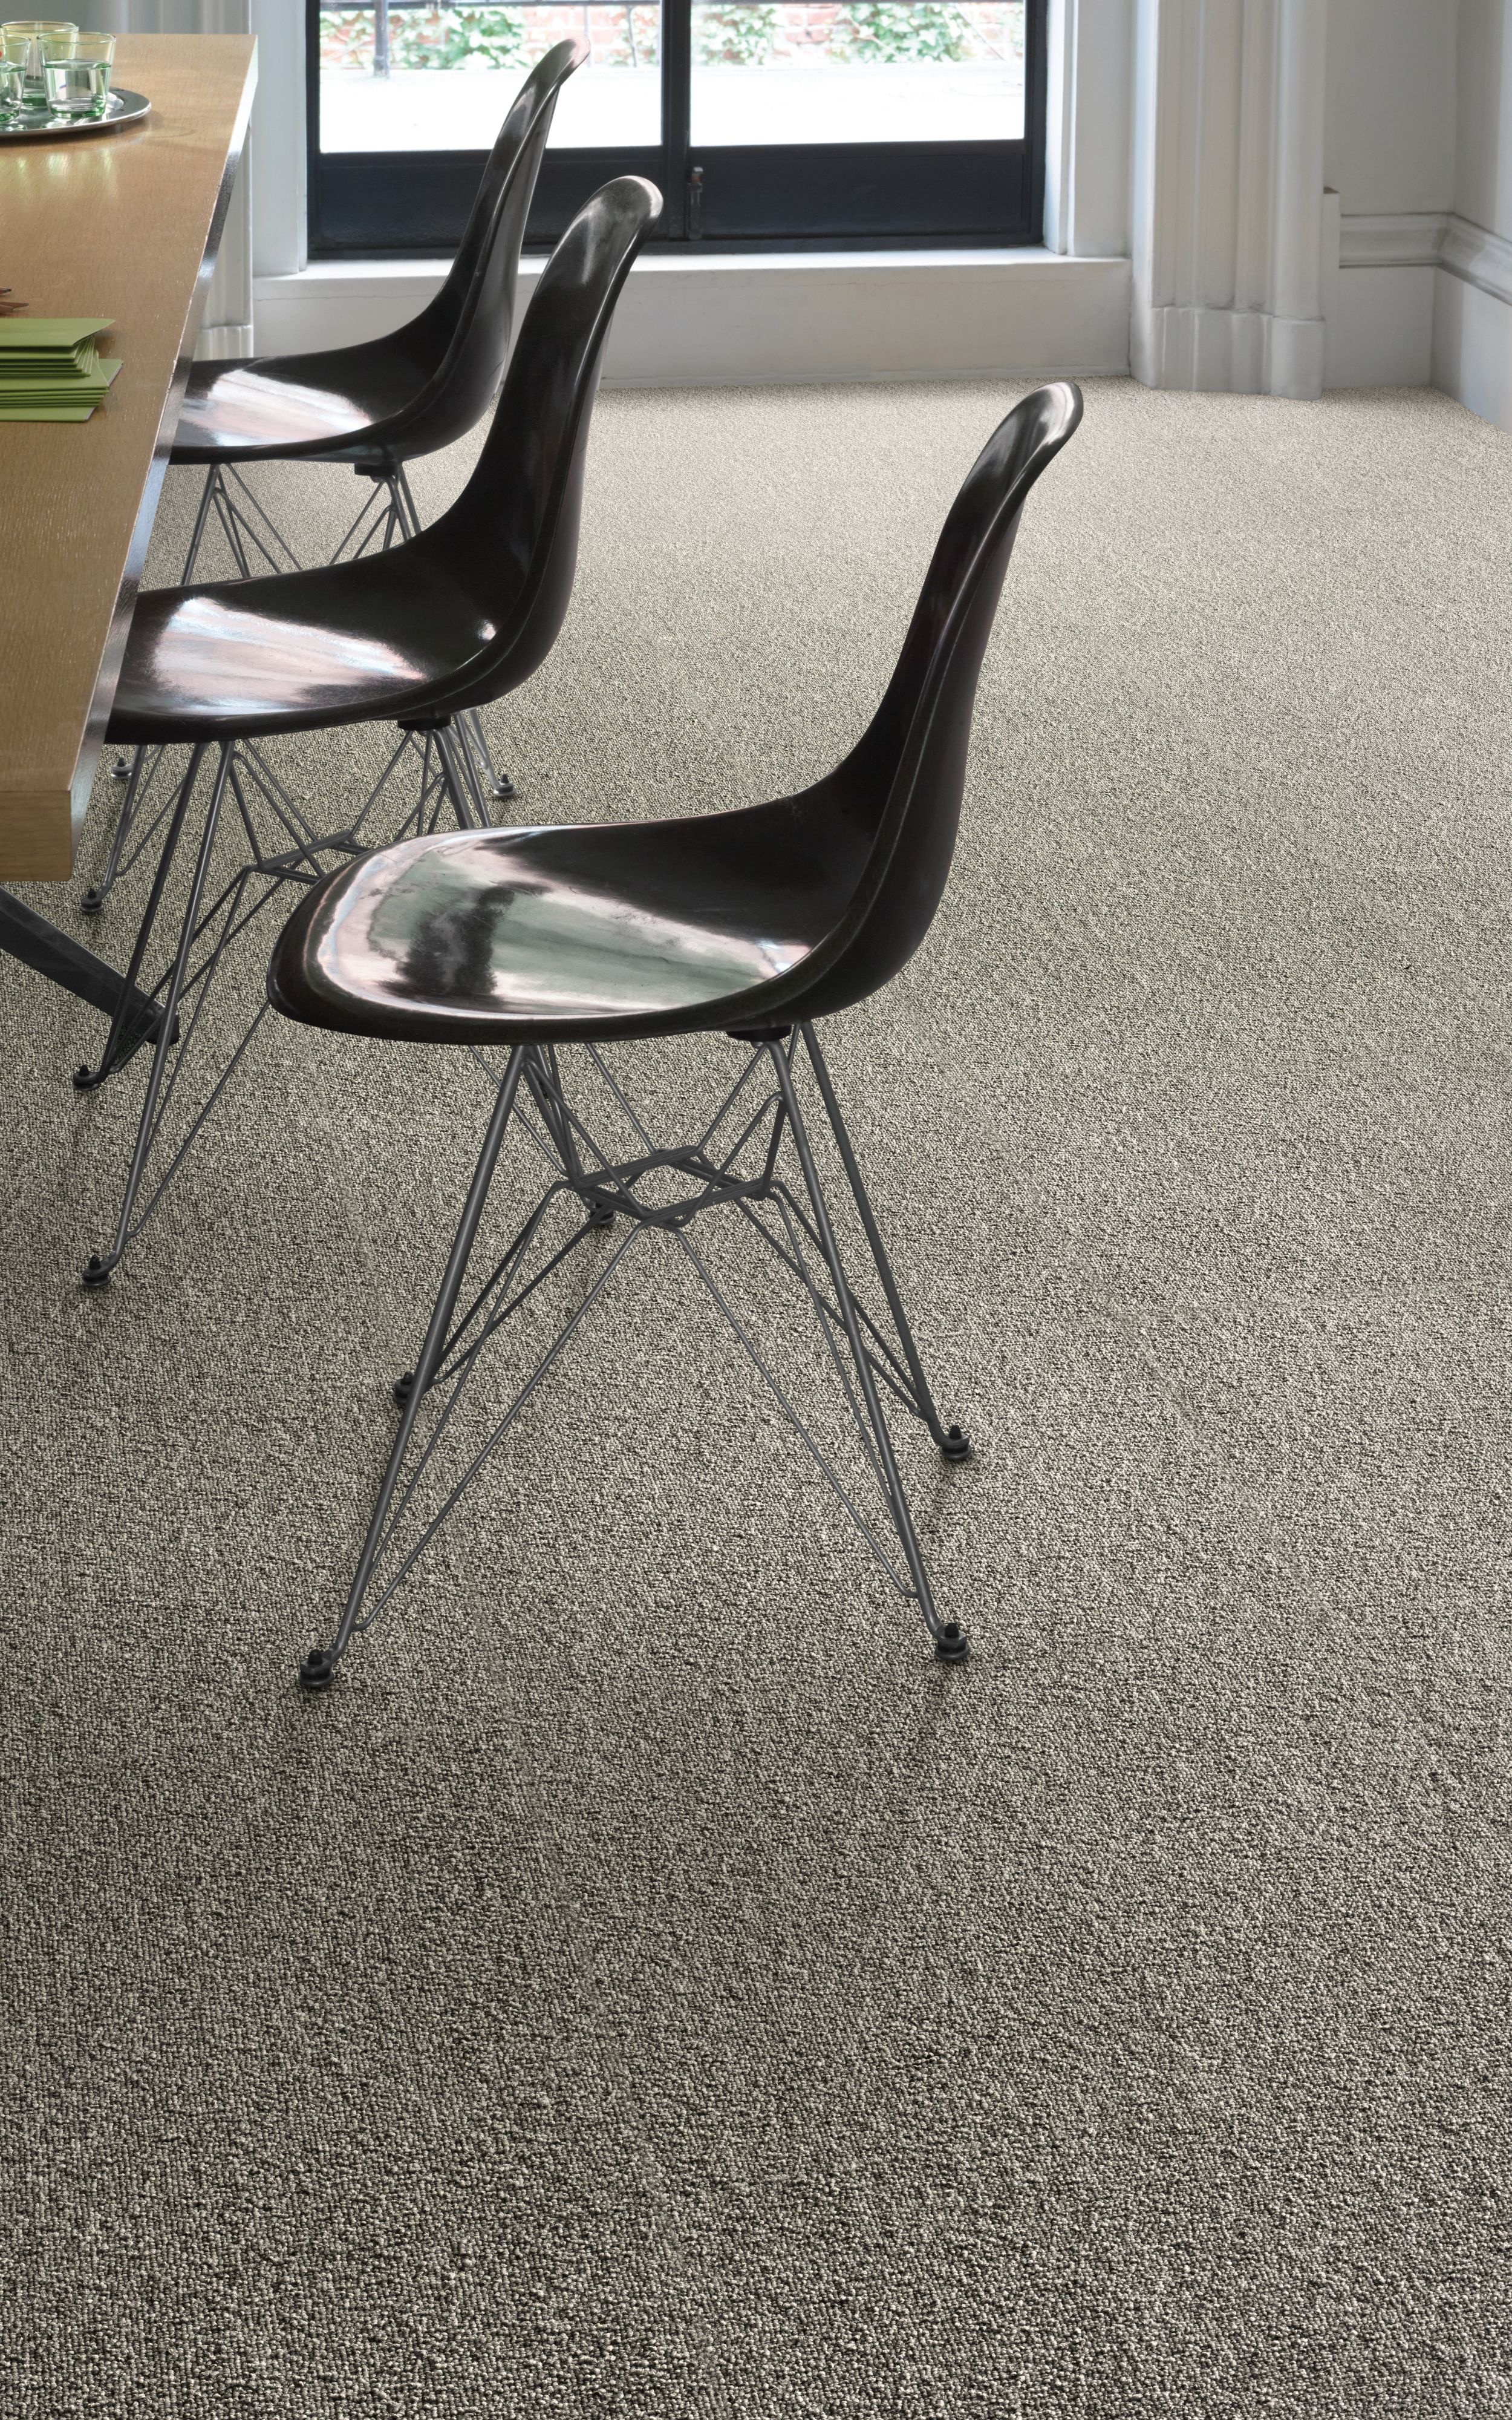 Interface UR302 carpet tile in close up with chairs imagen número 5